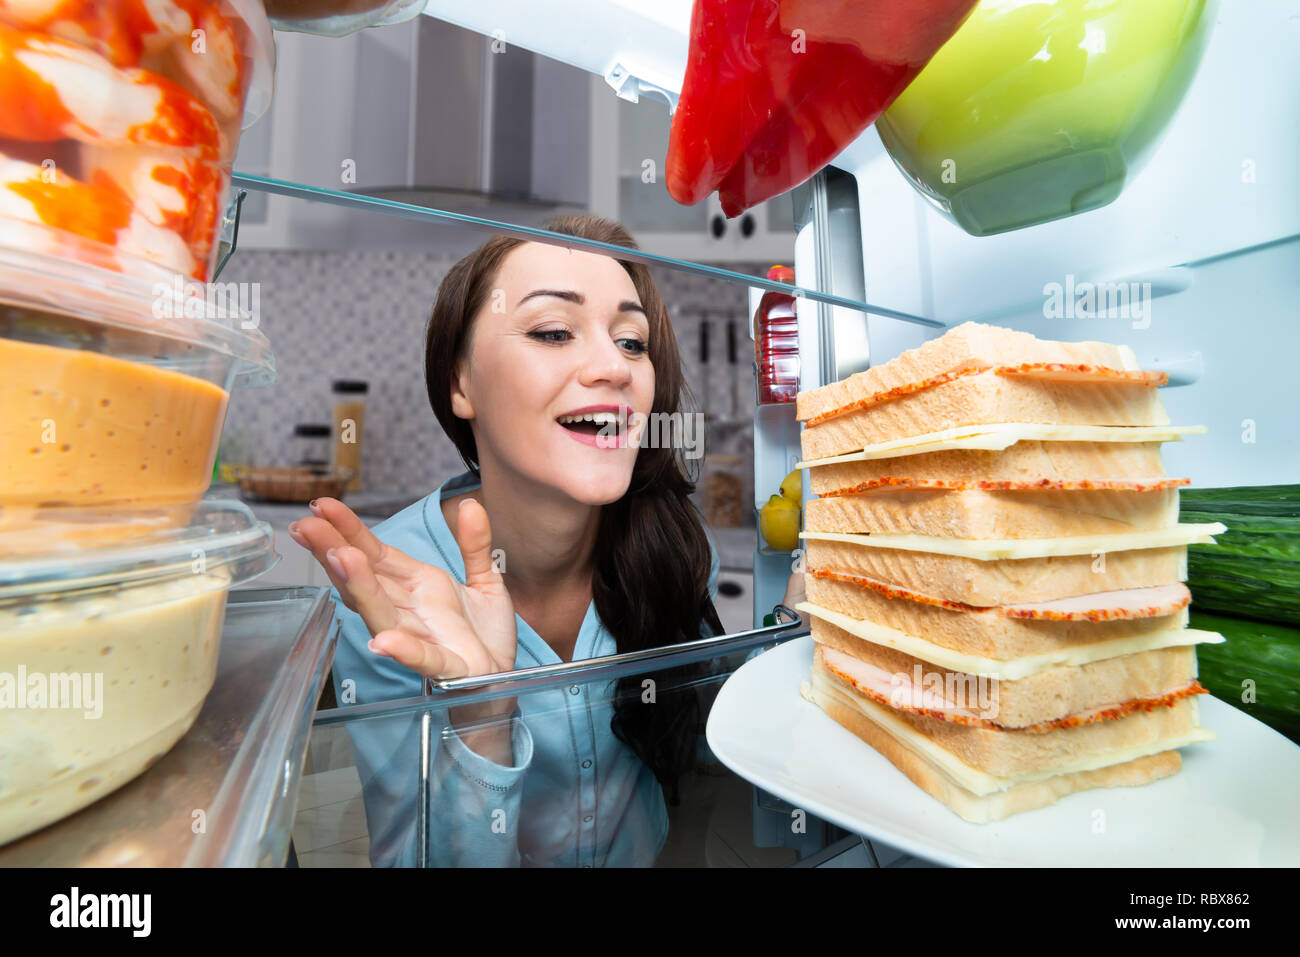 Hungry Woman Looking At Sandwich In An Open Refrigerator Stock Photo